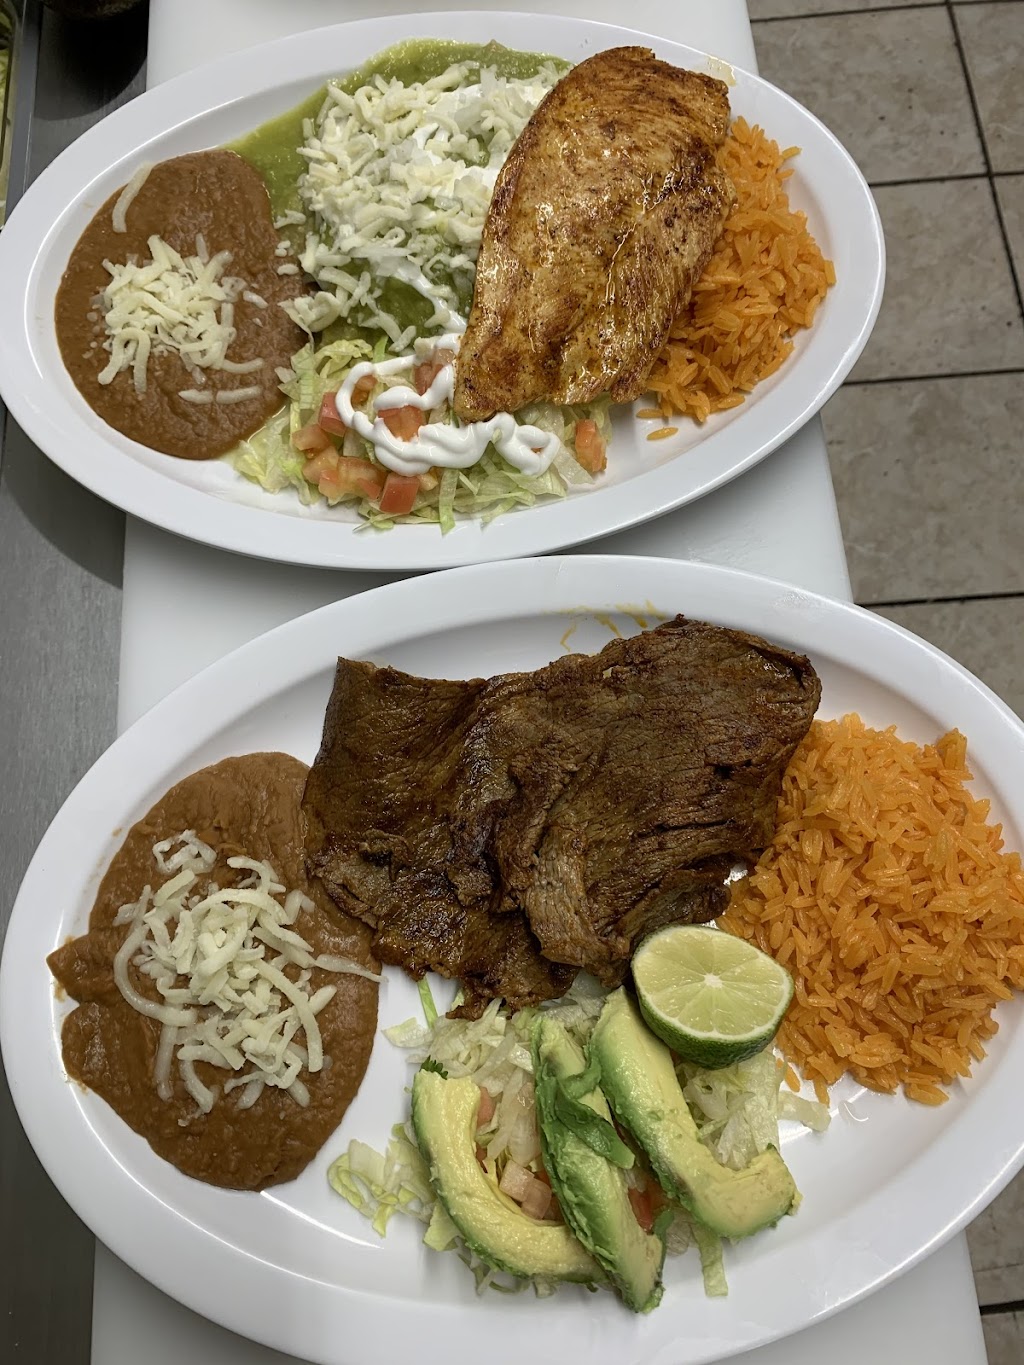 Tacos Burritos Y Mas | 2401 Central Ave, Lake Station, IN 46405 | Phone: (219) 962-3532